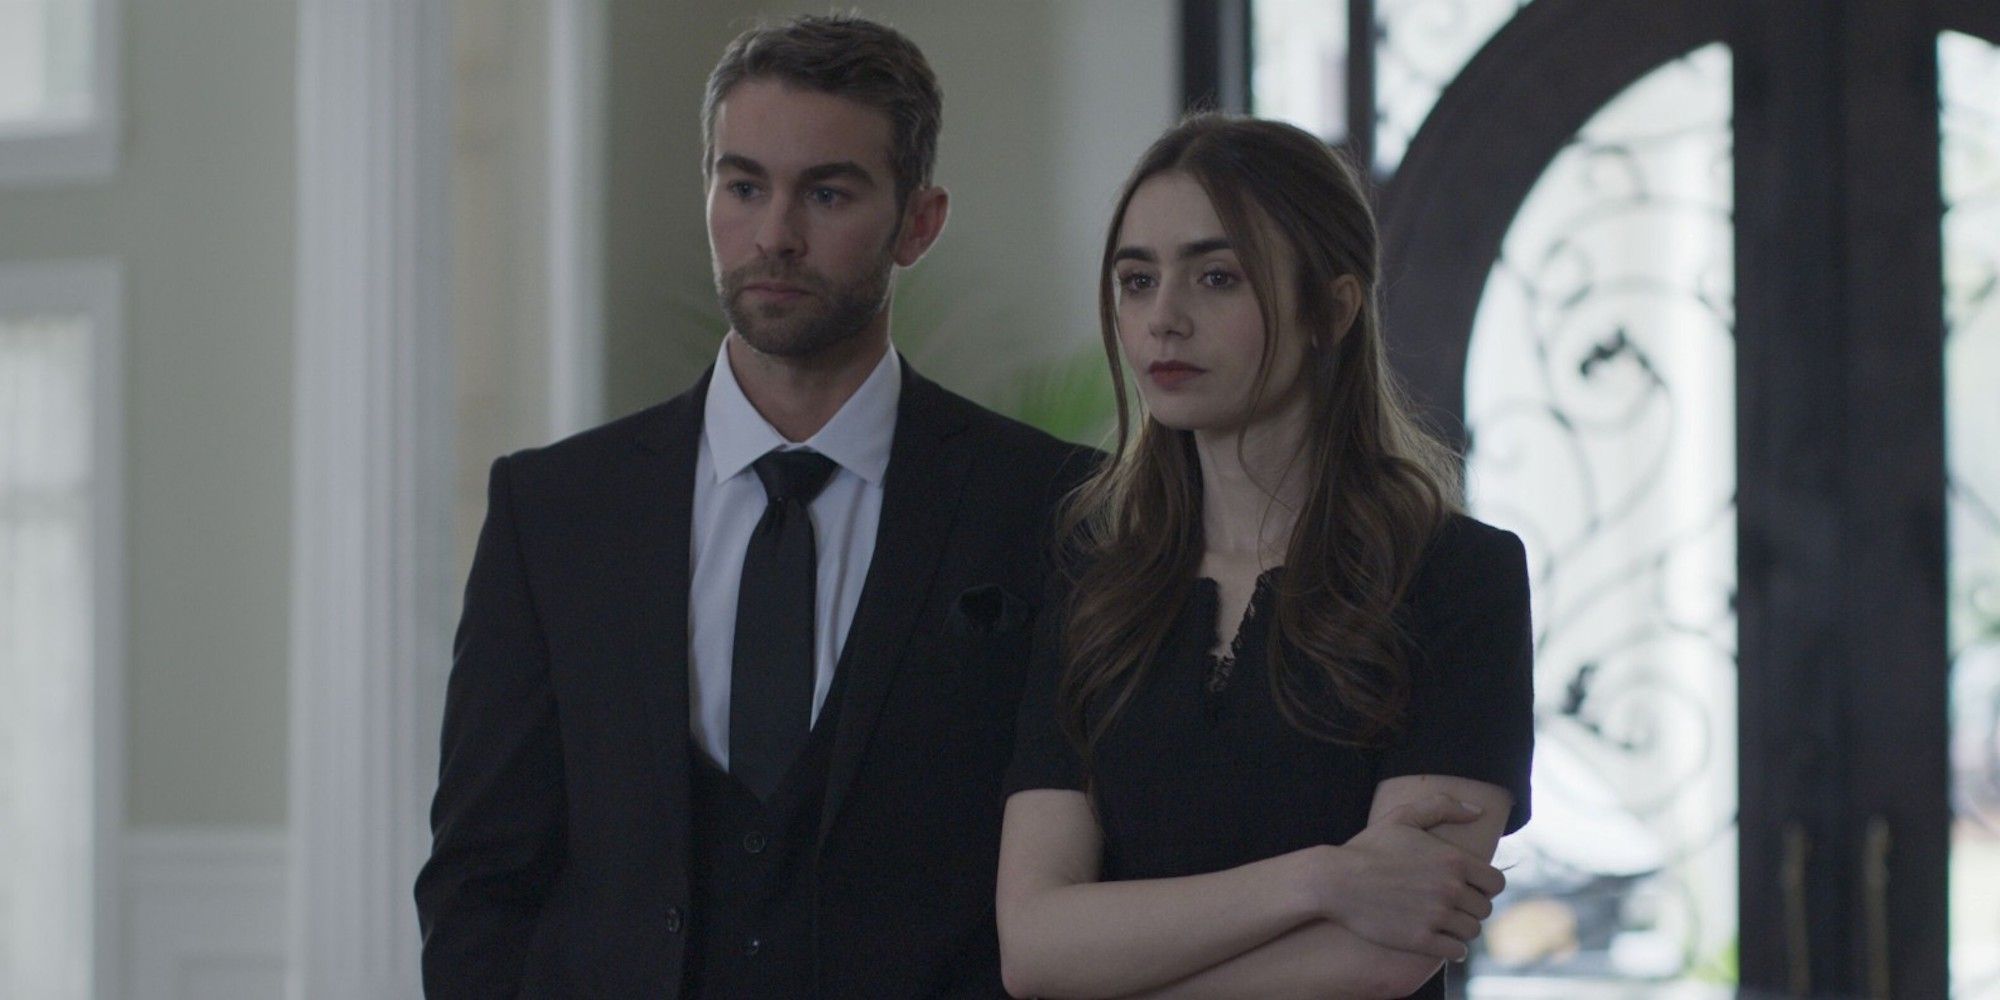 Lily Collins and Chace Crawford in Inheritance